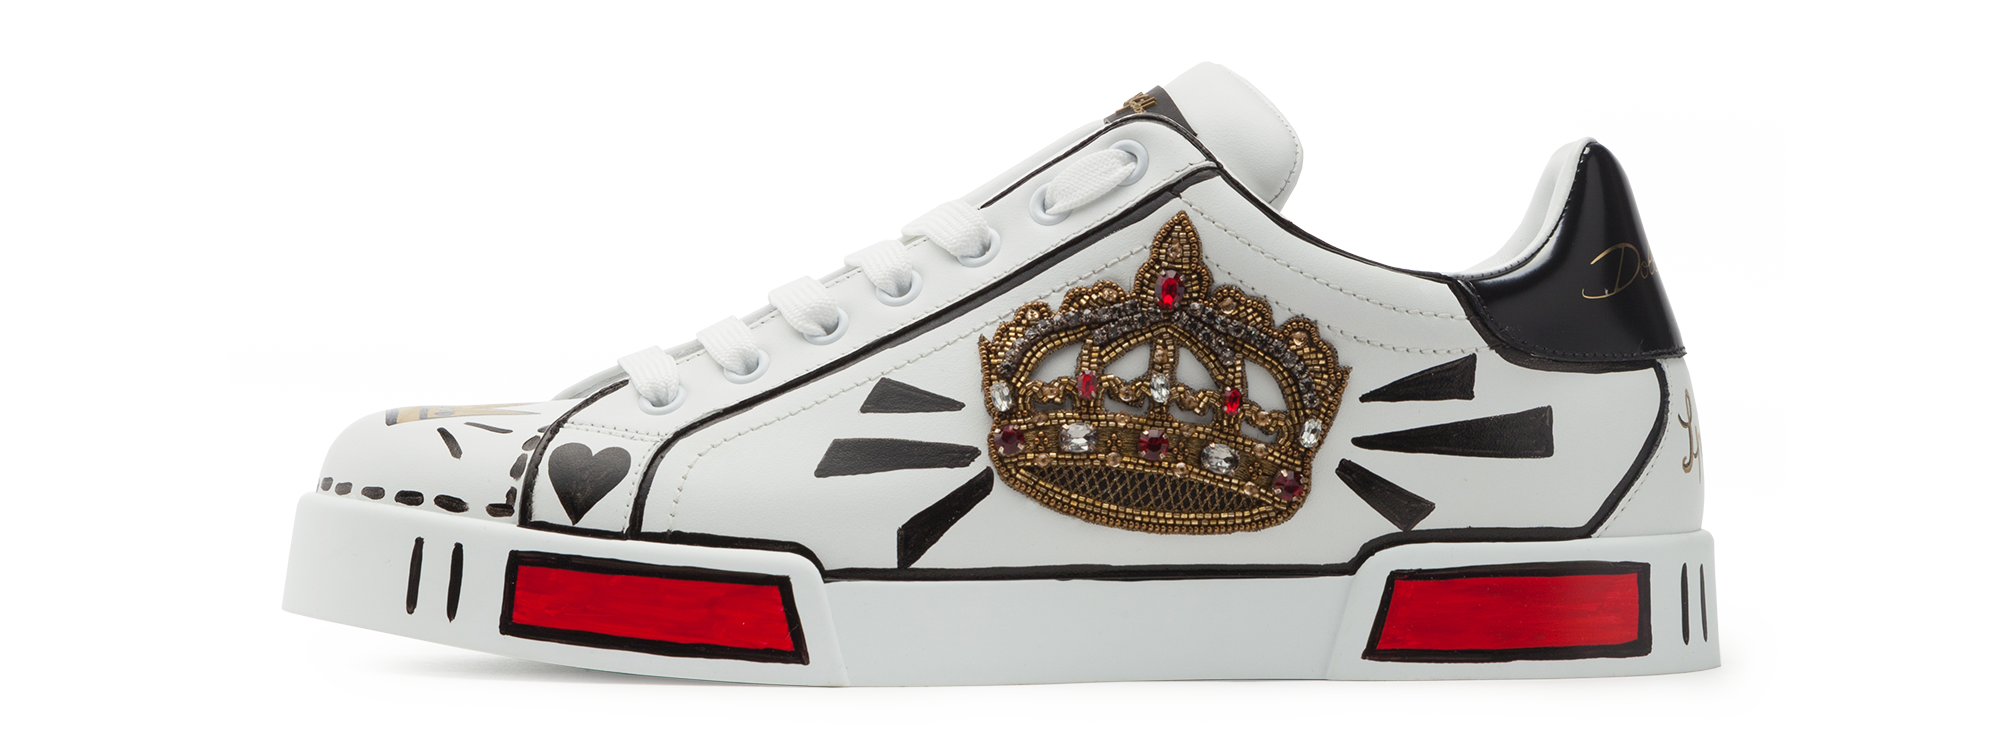 dolce & gabbana sneakers limited edition